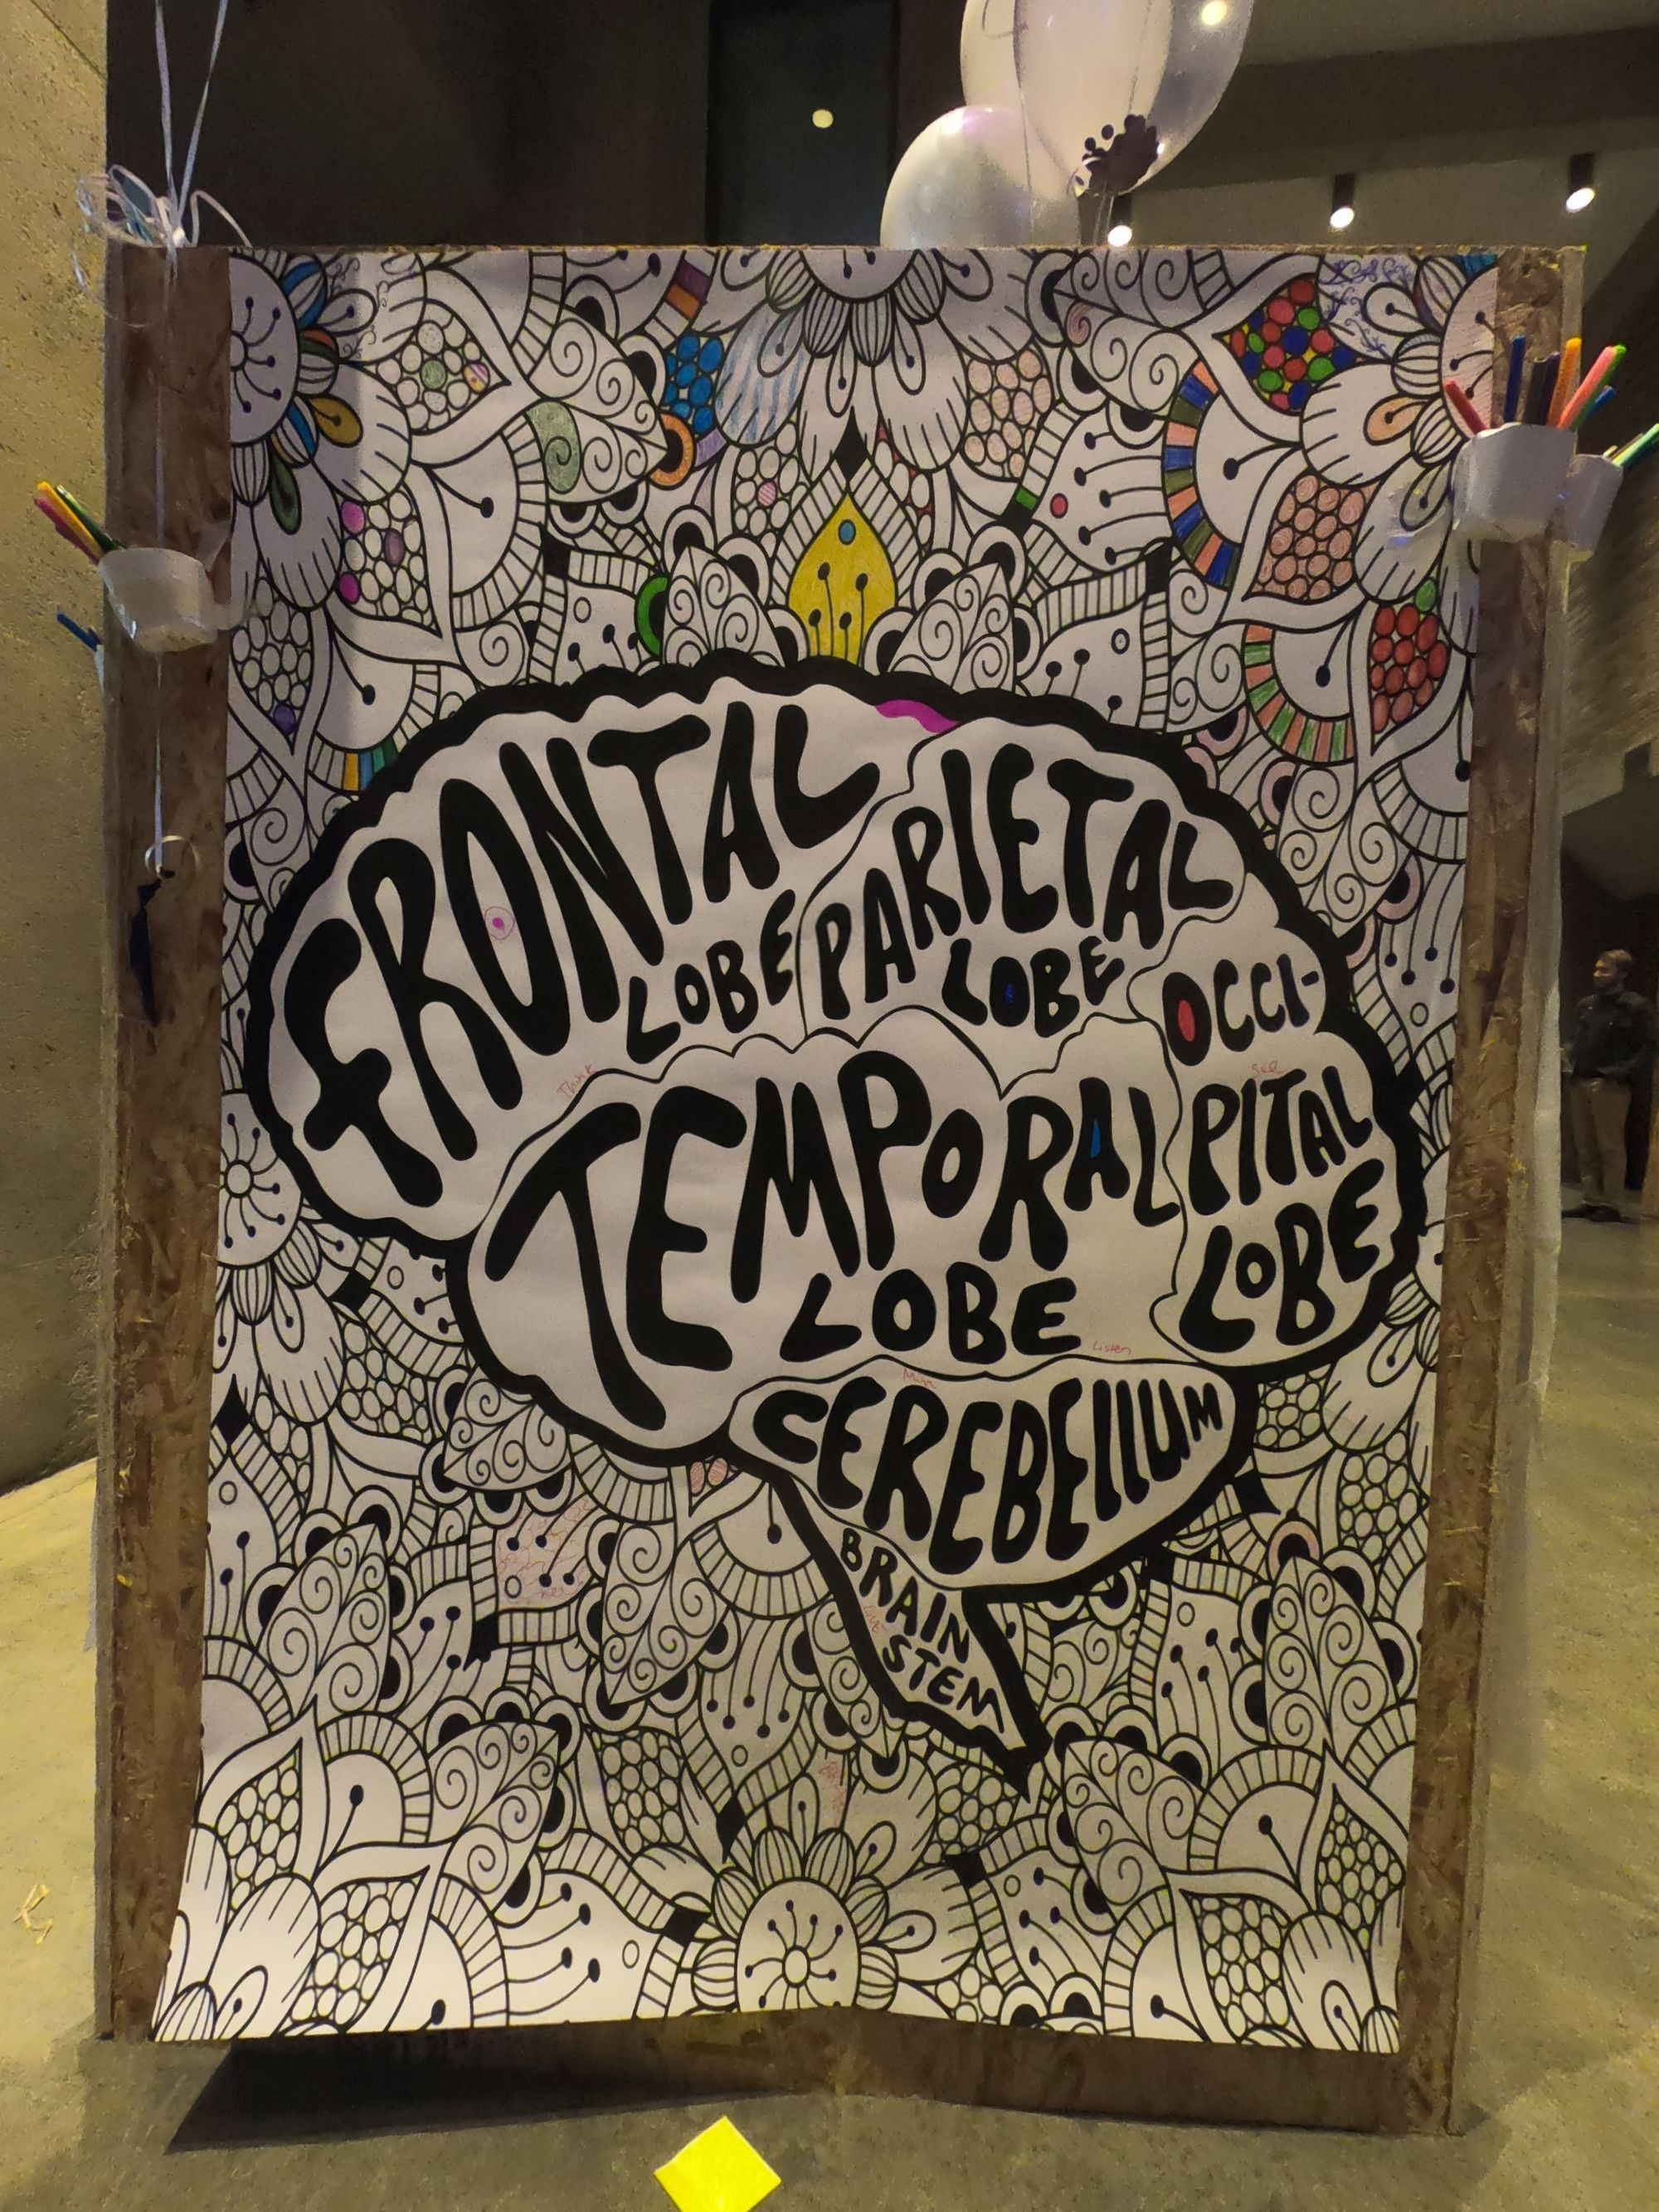 The bottom center image displays an intricate artistic piece in black ink, featuring a brain with the four lobes labeled, as well as intricate designs surrounding it, that attendees filled in with color before the panel discussion.